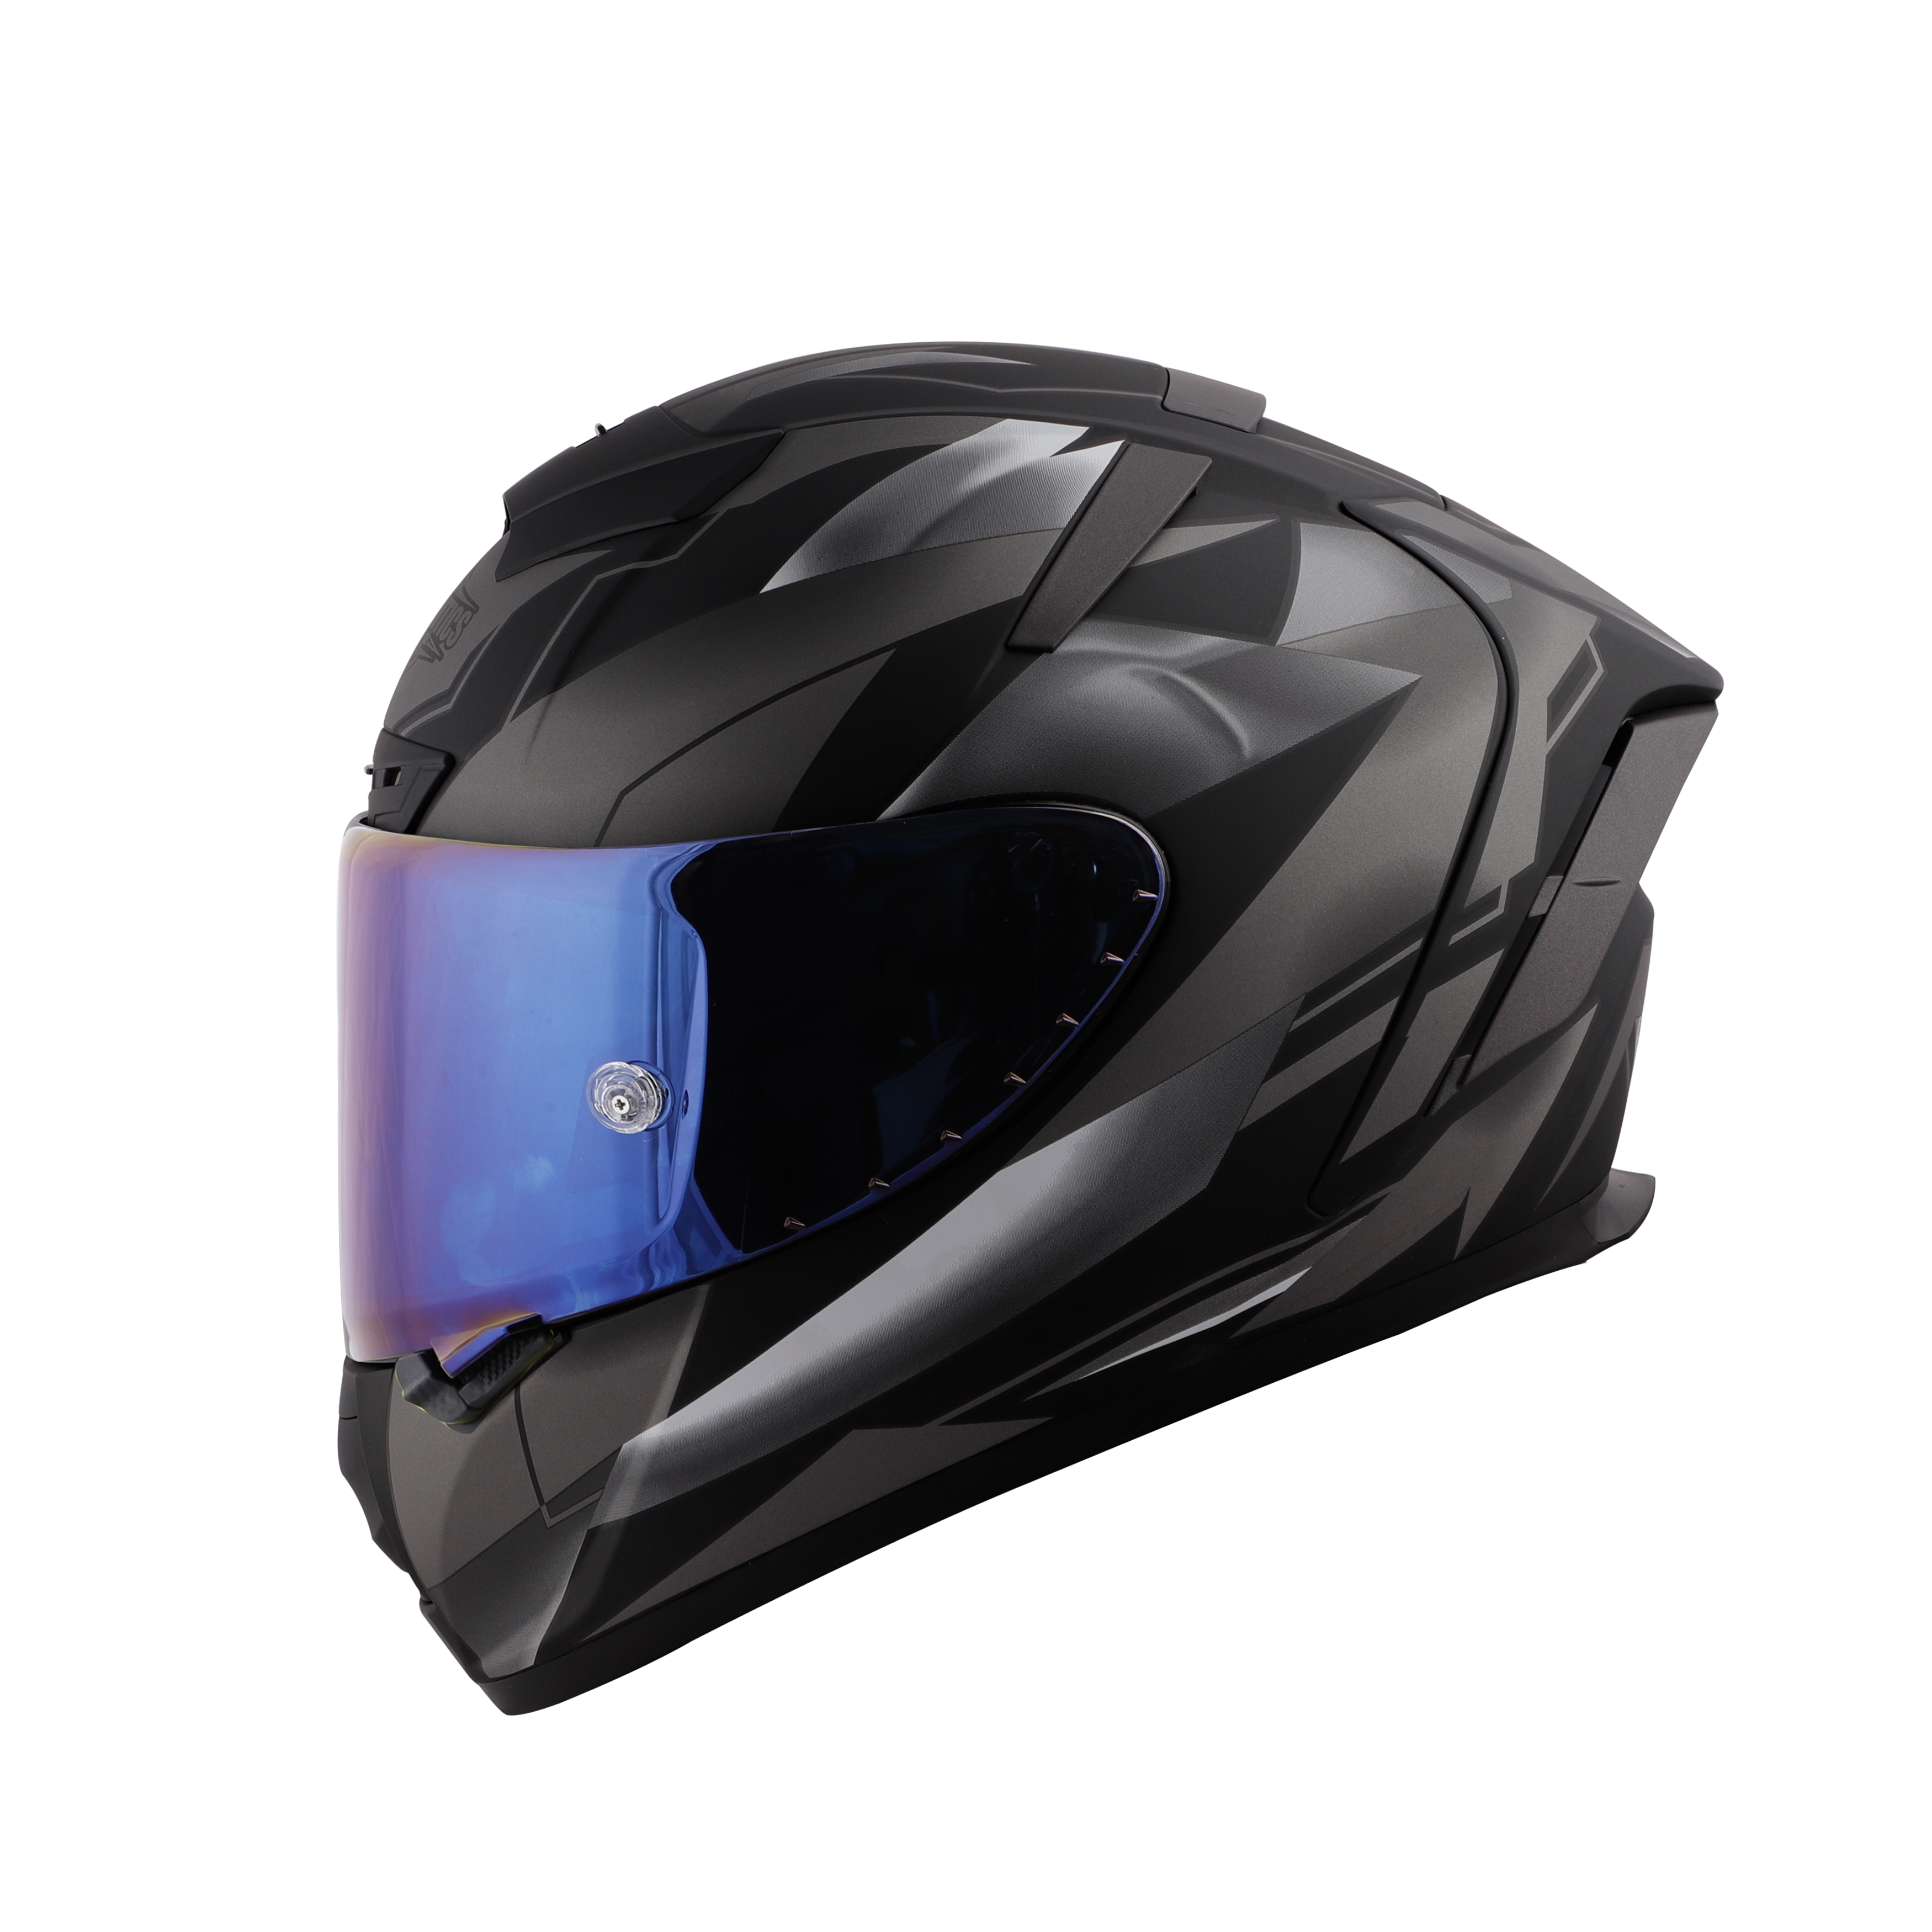 SA-2 METALLIC MAT BLACK WITH GREY ( FITTED WITH CLEAR VISOR  EXTRA CHROME BLUE VISOR FREE) WITH ANTI-FOG SHIELD HOLDER